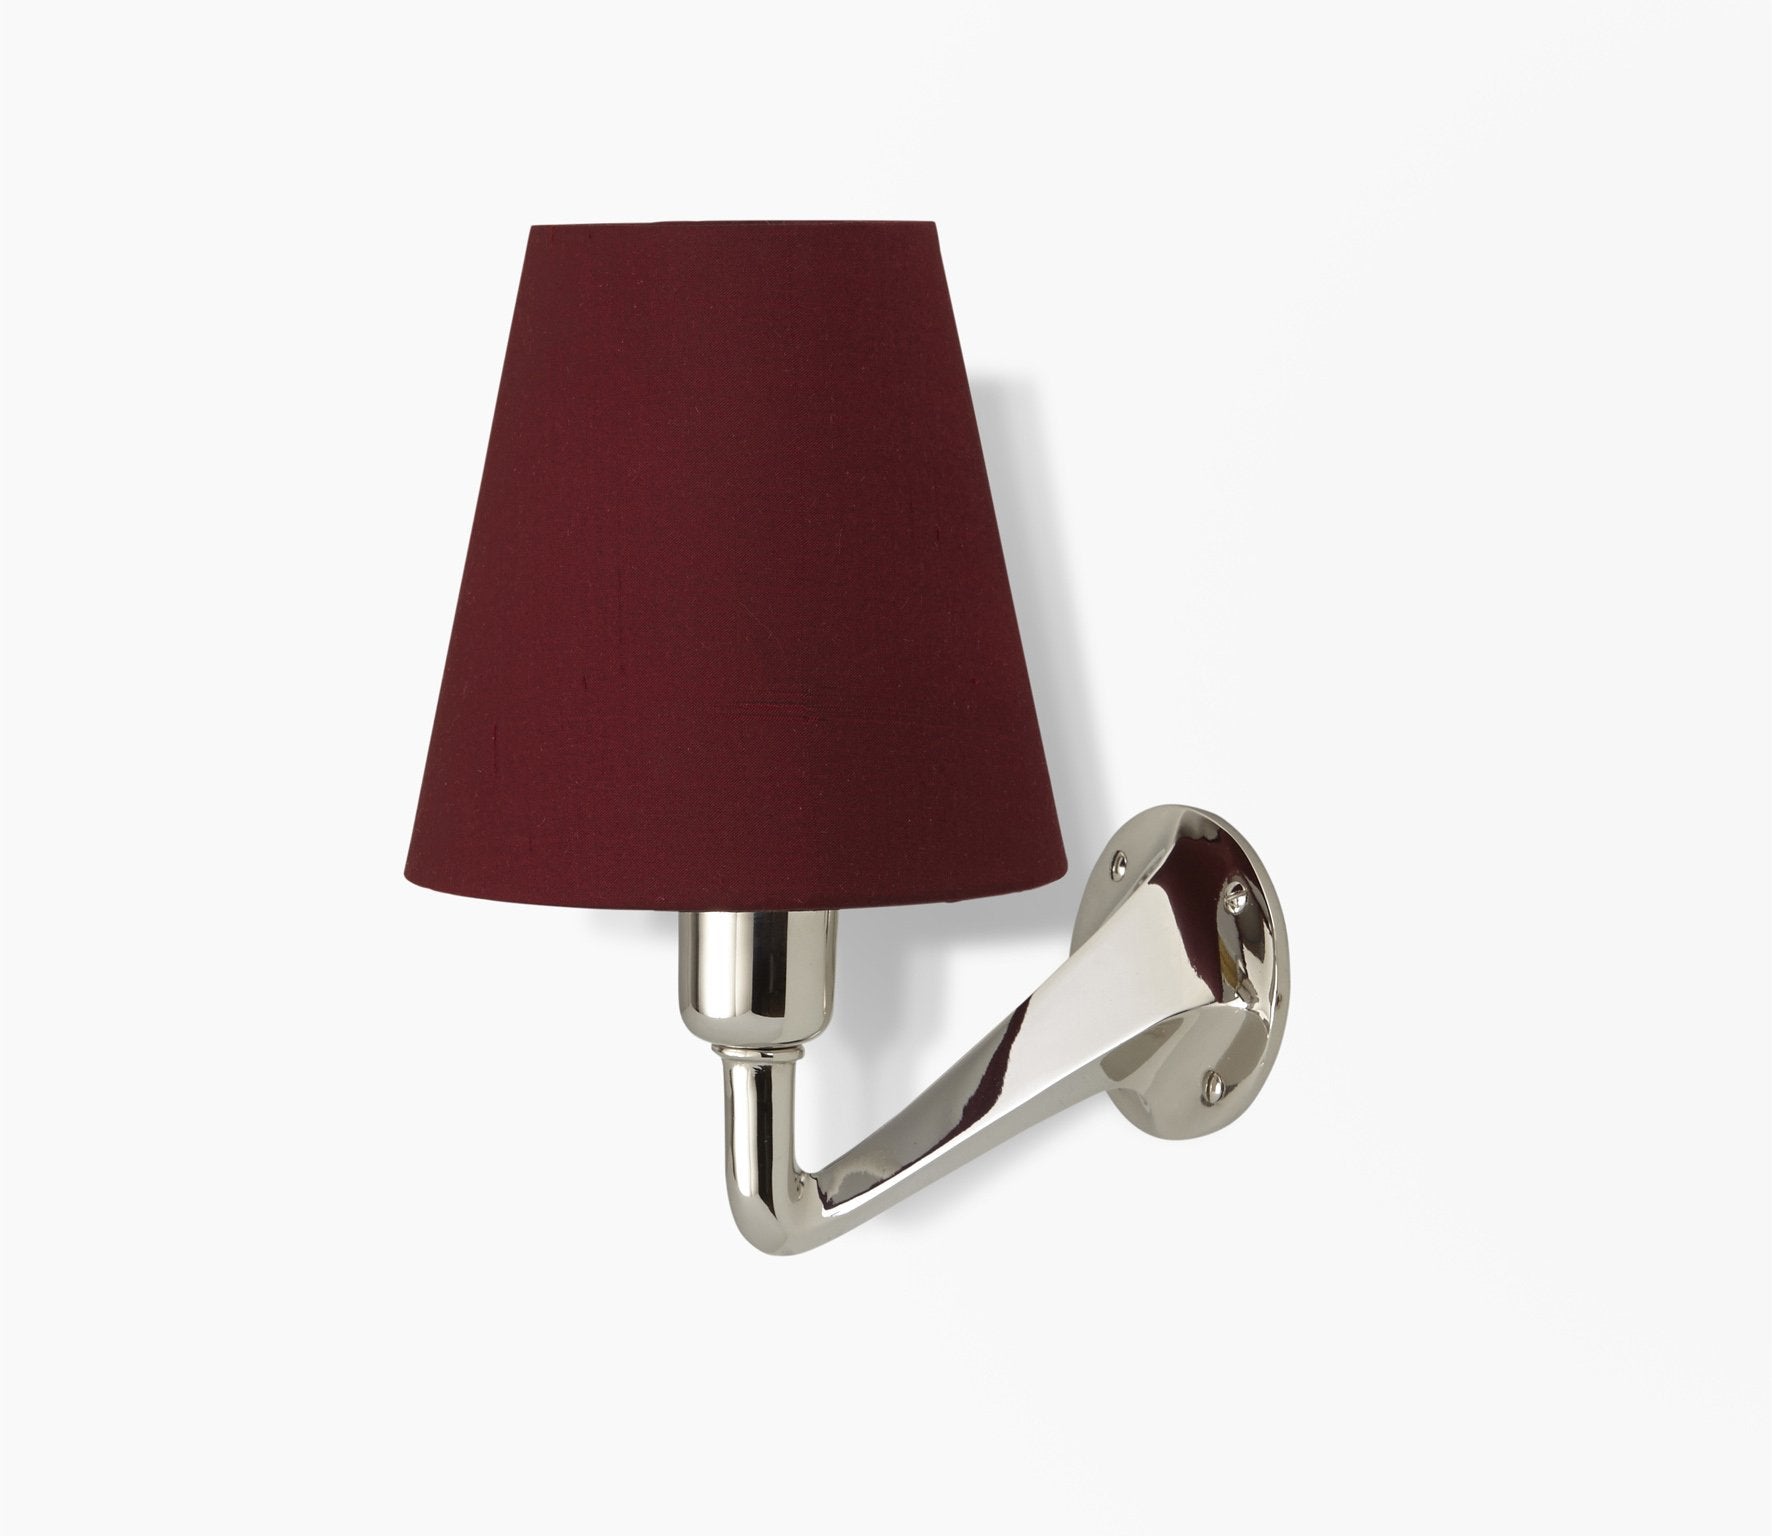 Leila Wall Light with Plain Empire Shade Product Image 5